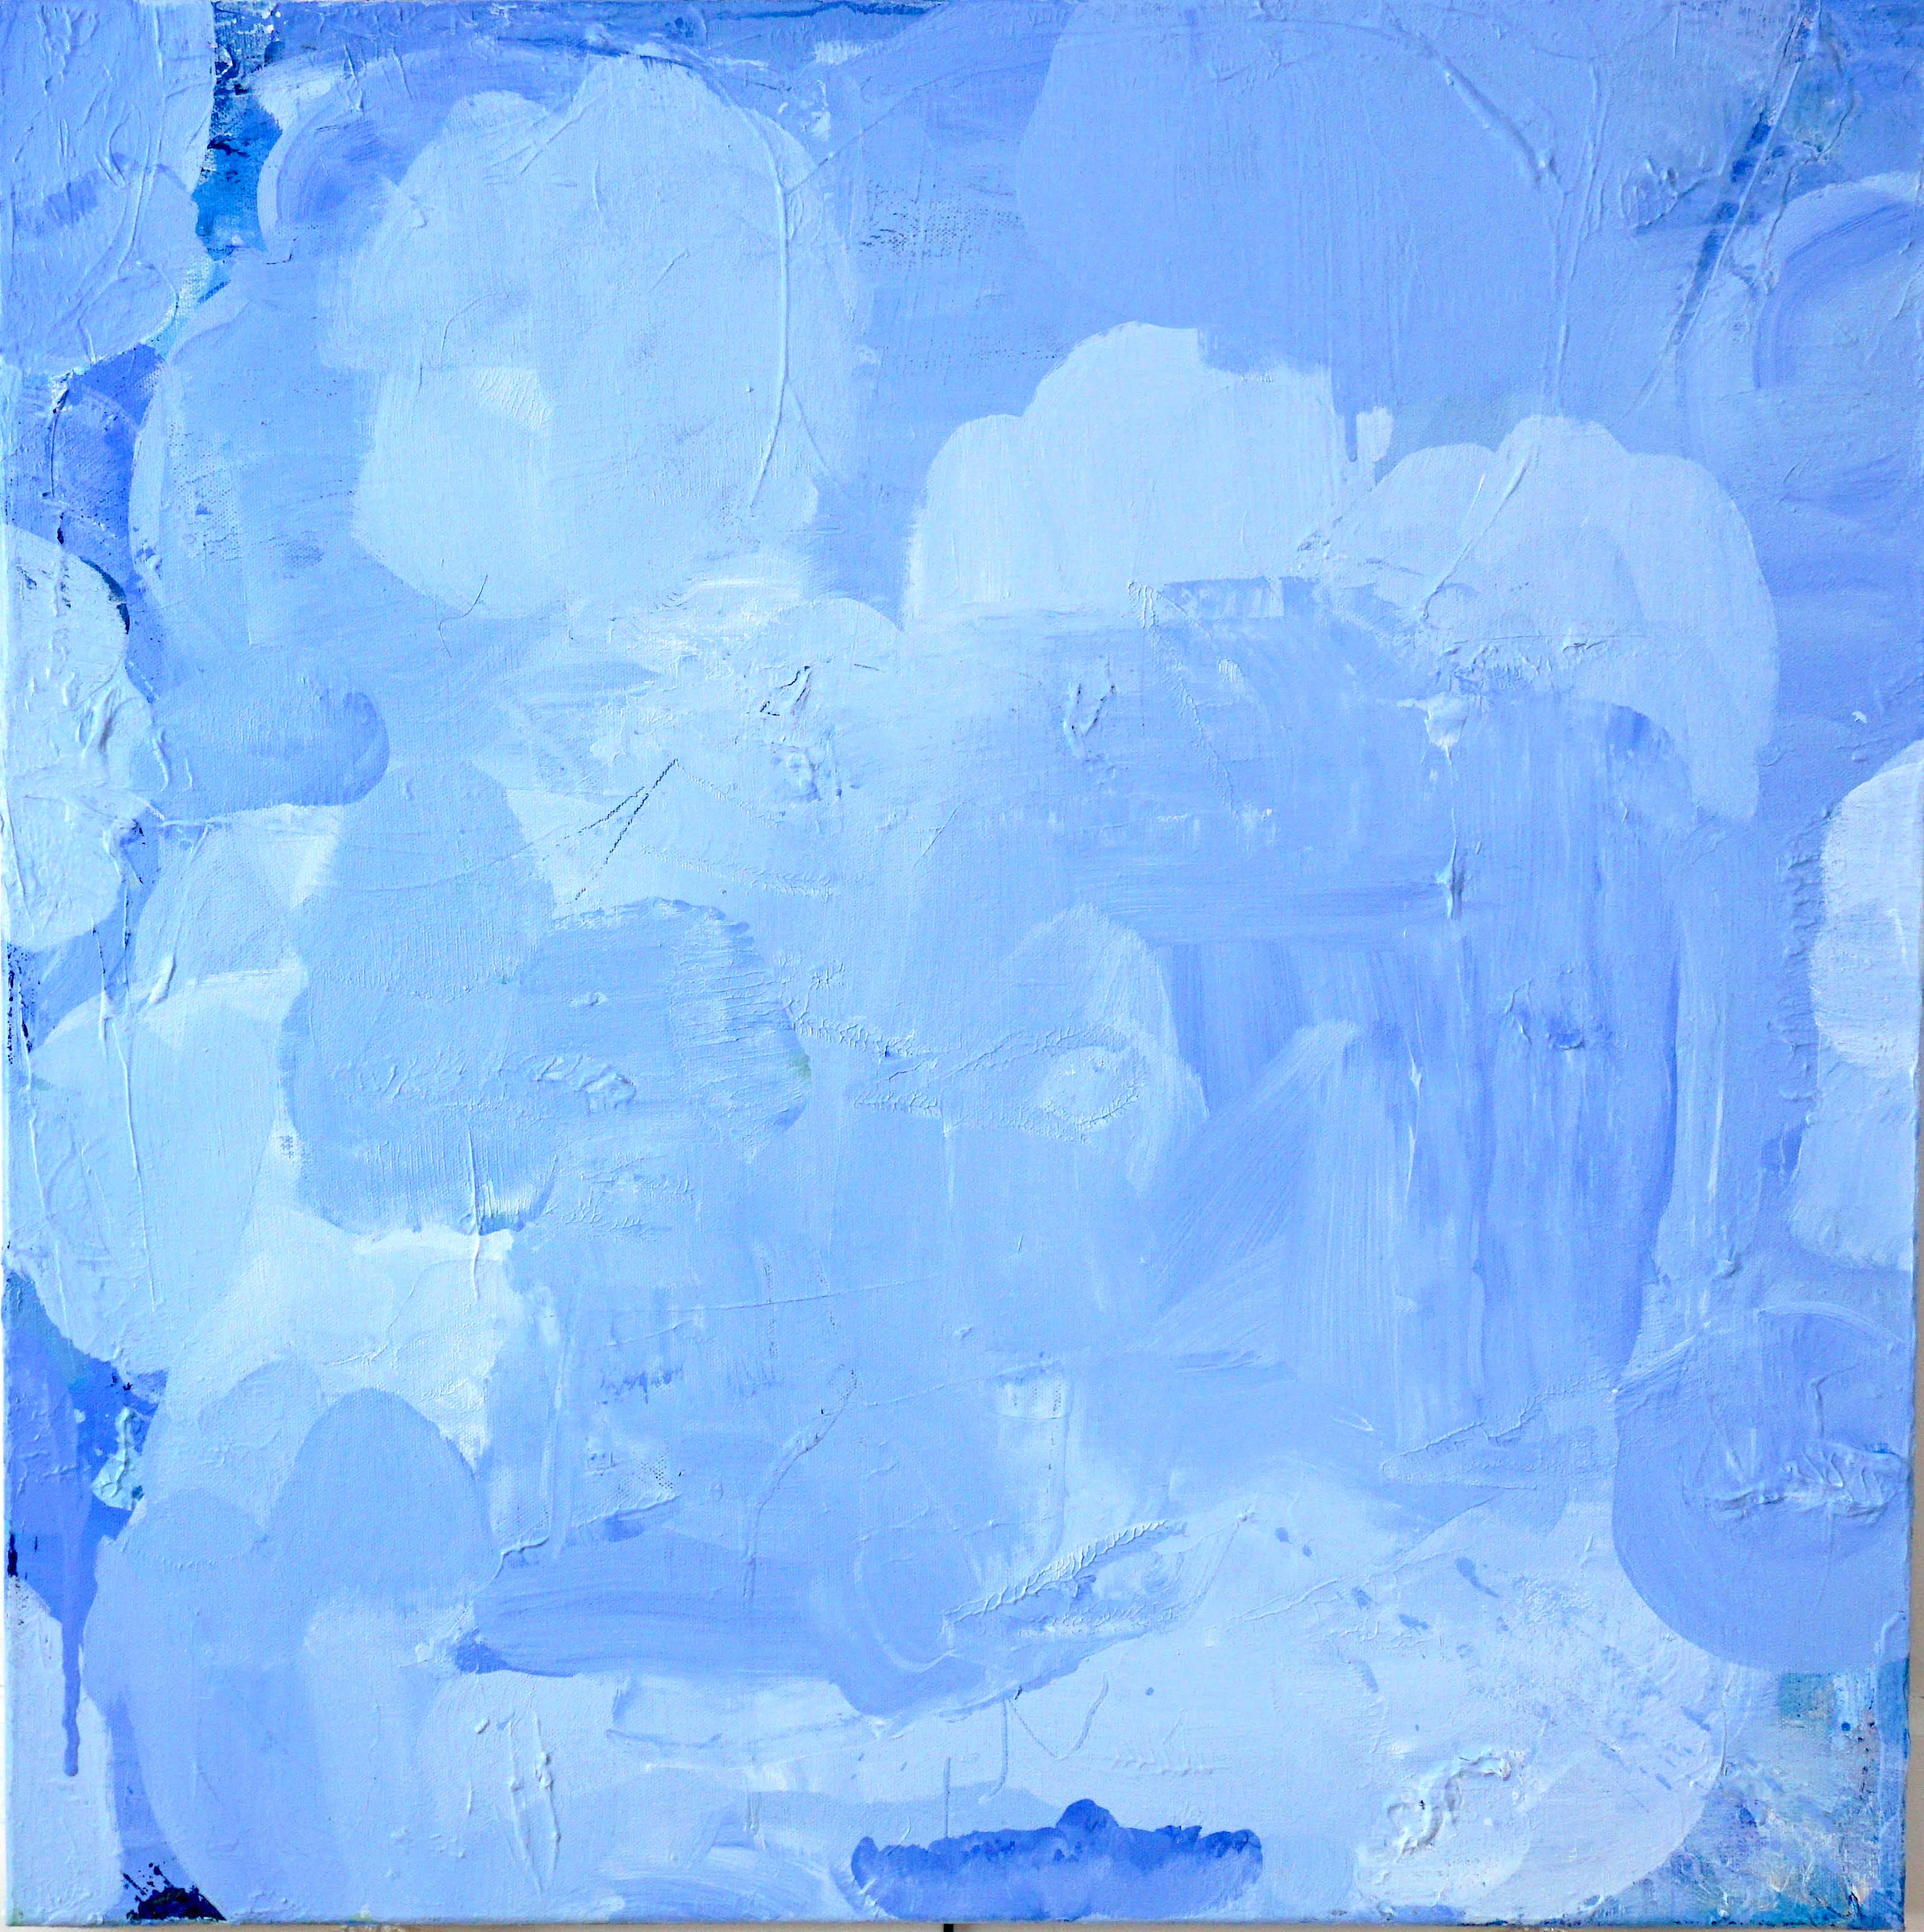 Lisa Fellerson Abstract Painting - Out of the Blue, blue abstract expressionist painting on canvas, textured